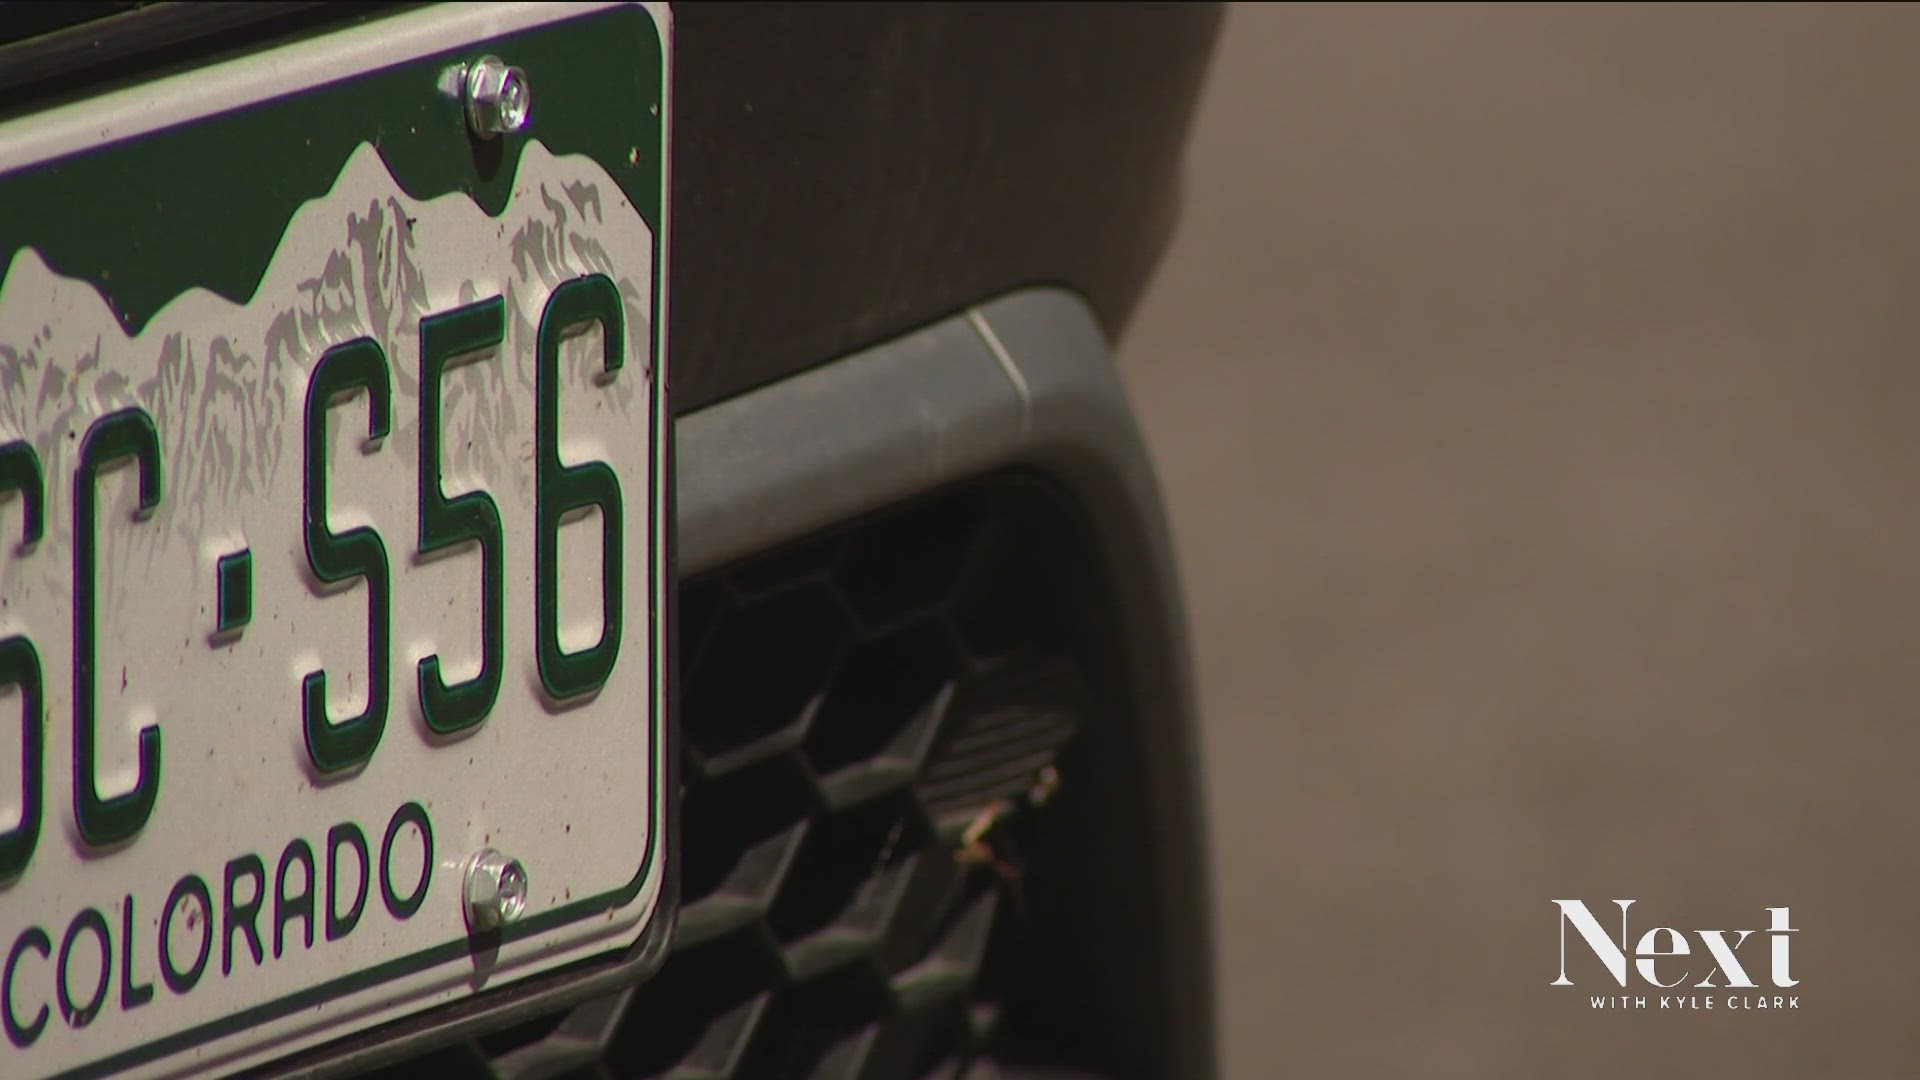 One of the reasons you're seeing so many of those retro black license plates on the roads is because Colorado is leaning on people to ditch old plates.